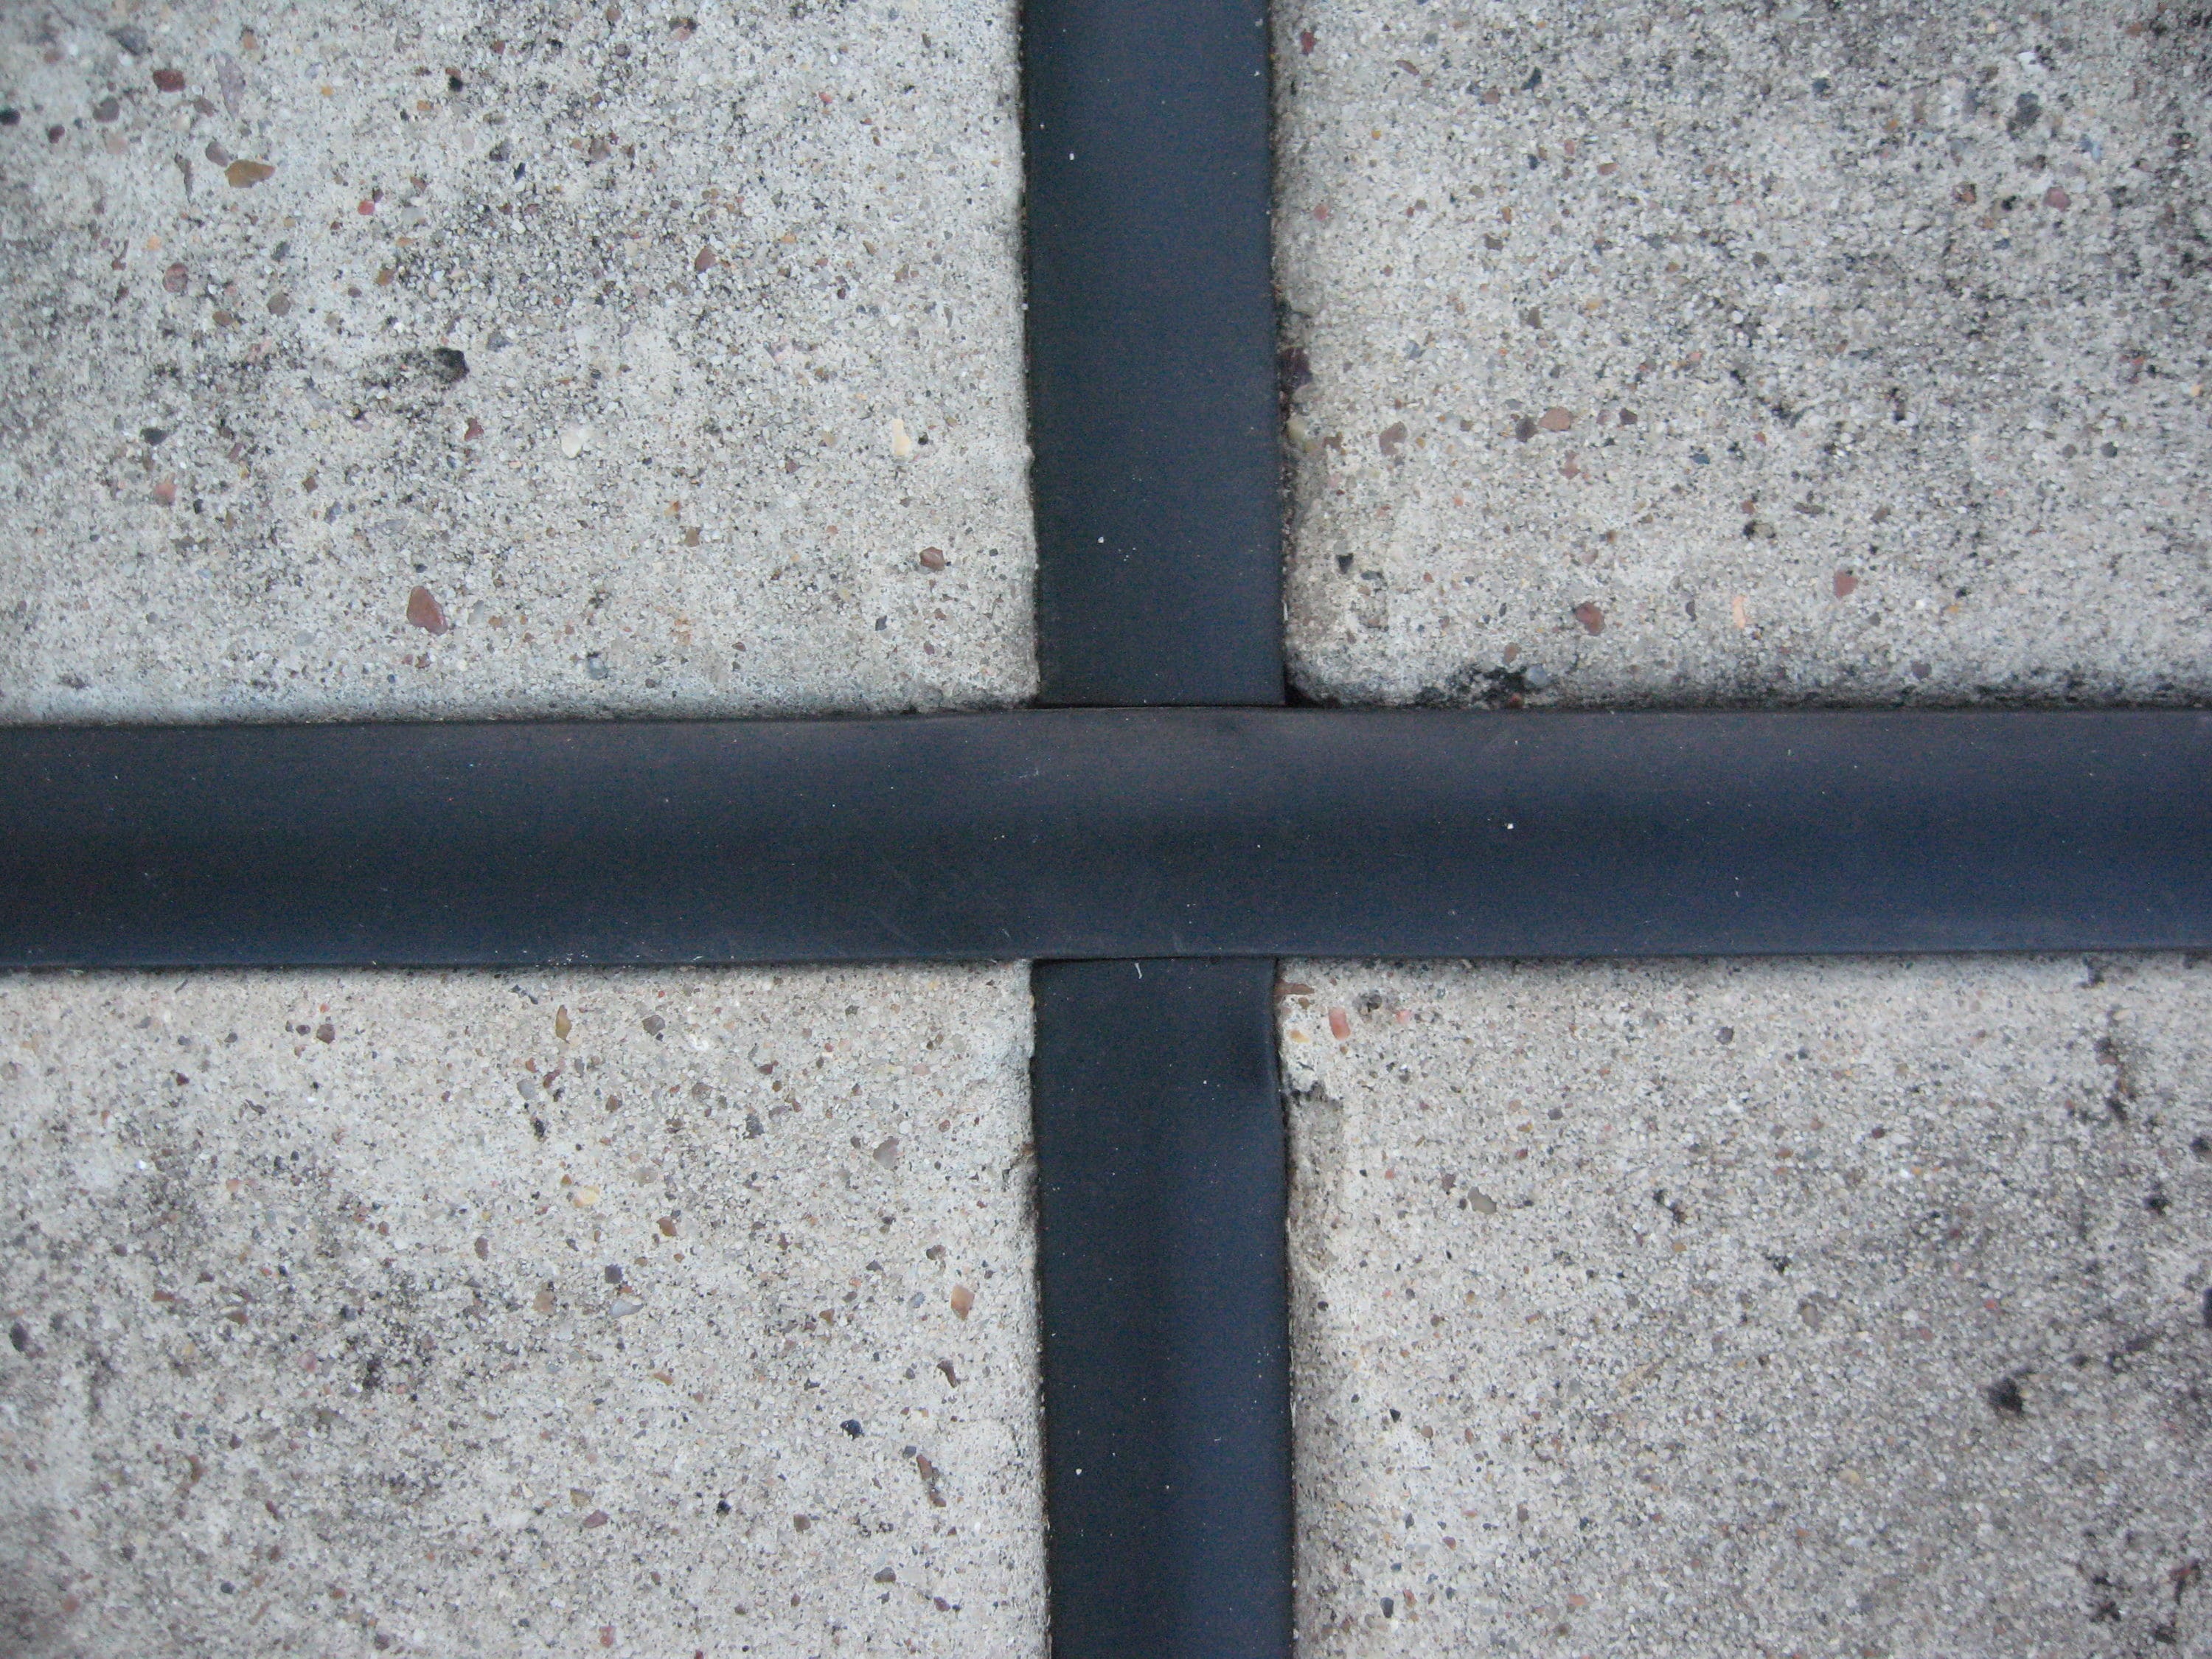 Trim A Slab 3/4 in. x 50 ft. Black Concrete Expansion Joint Replacement